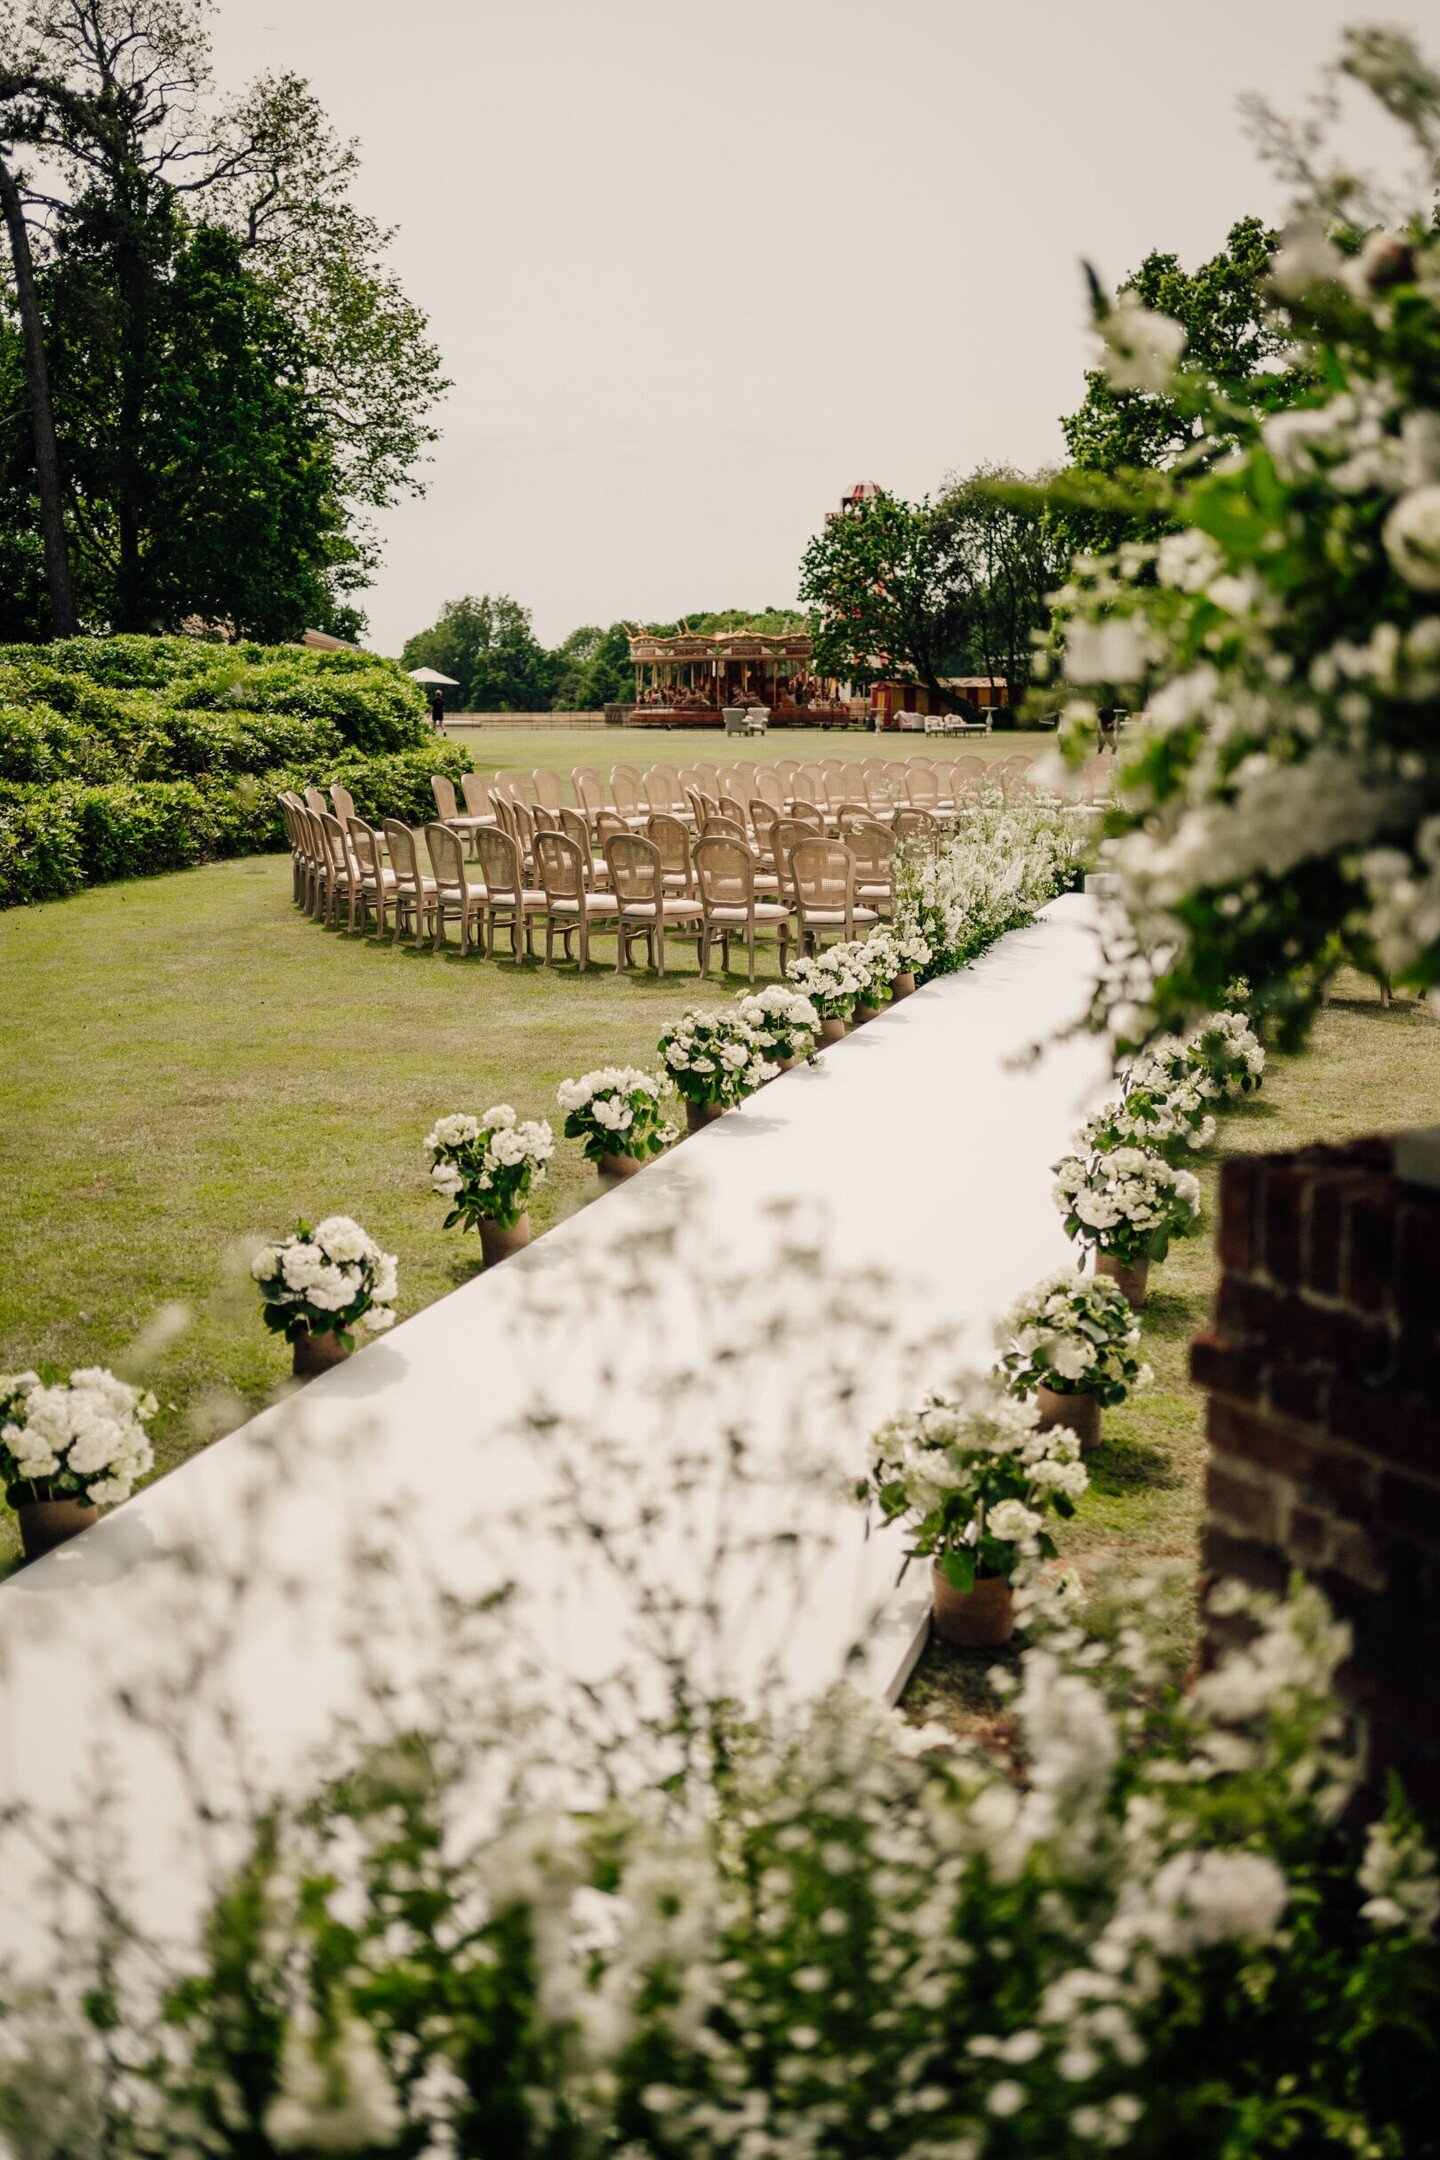 At A&amp;J's remarkable summer wedding, hosted at their family home last summer, the scene was set for an unforgettable ceremony. The aisle, adorned with blooms of white and greenery, guided guests to an elegant spiral formation of Elliana chairs. Ag